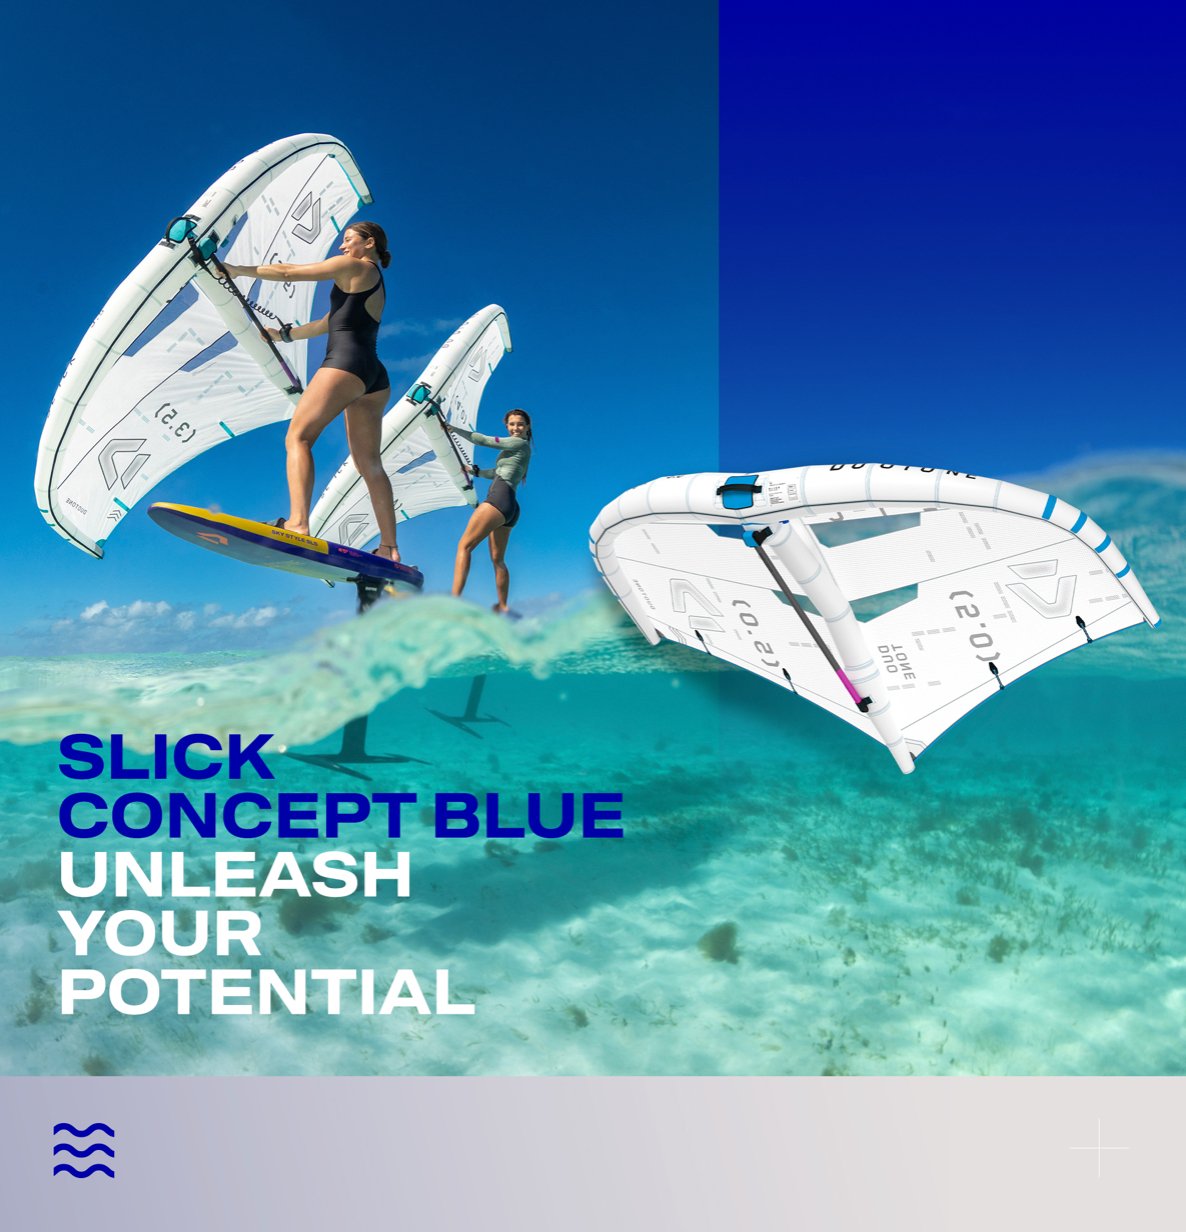 NEW Duotone Slick Blue Concept Eco Wing Foil - Worthing Watersports